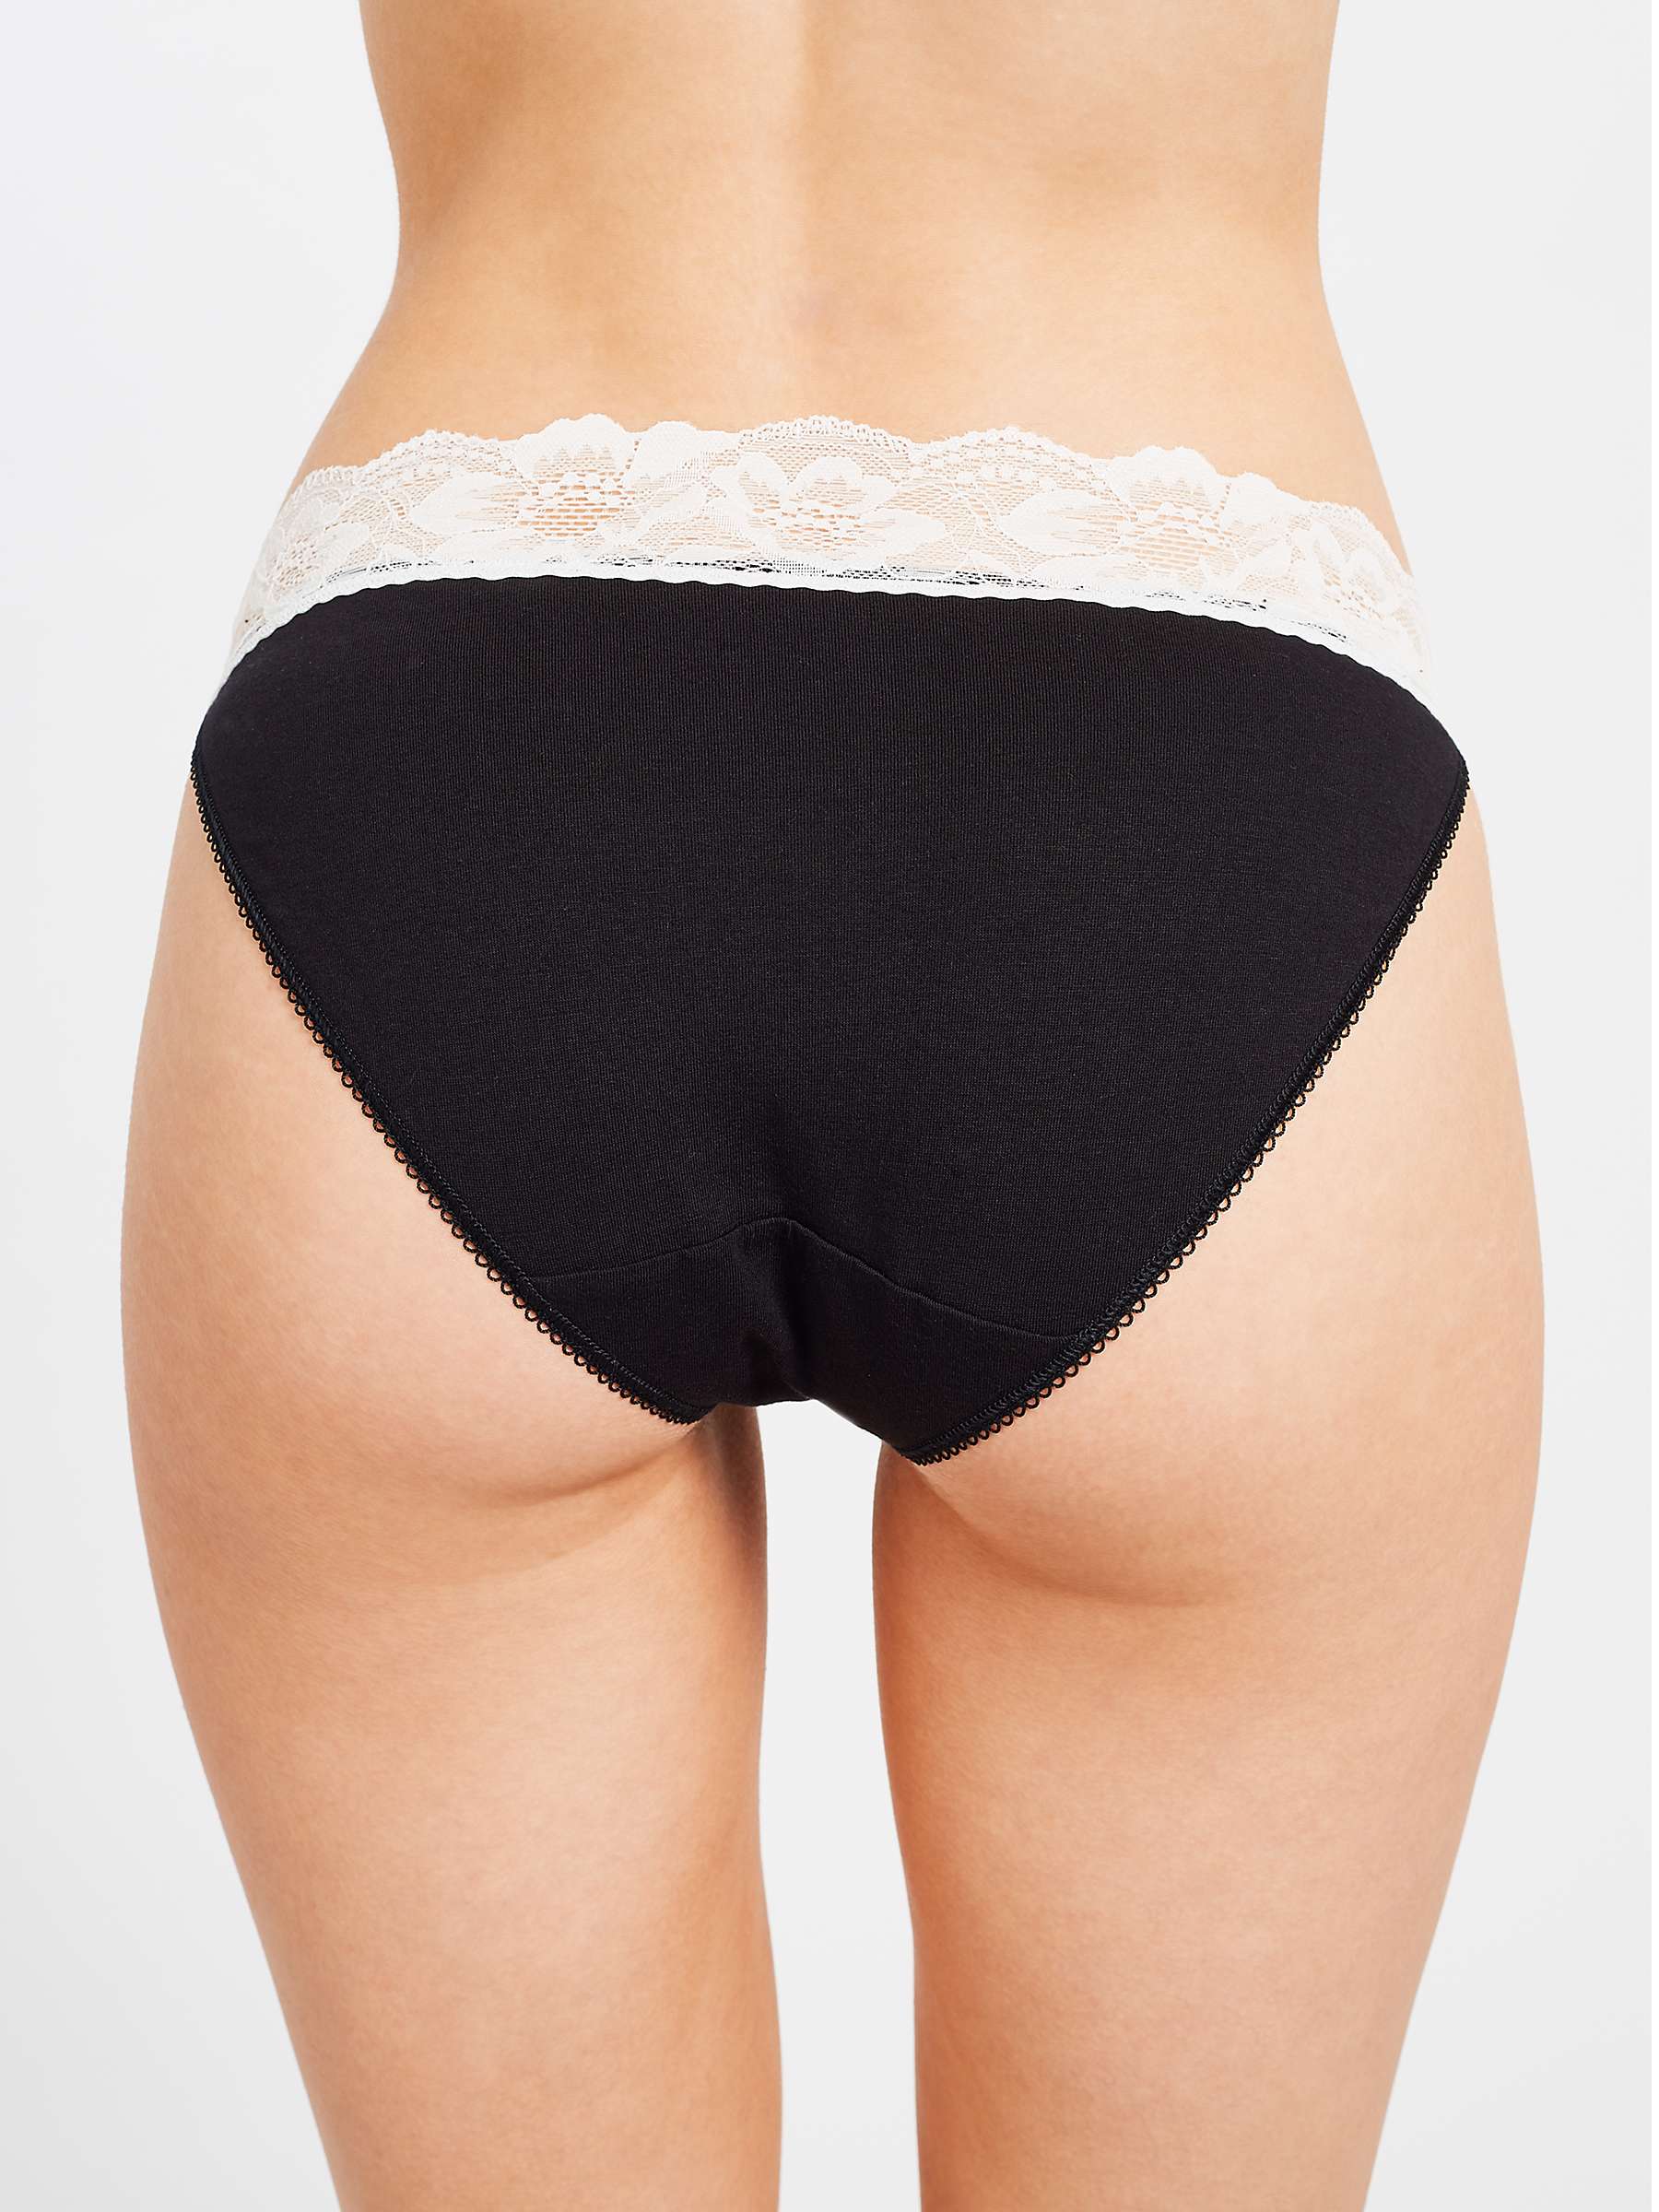 Buy John Lewis ANYDAY Lace Trim Tanga Knickers, Pack of 3 Online at johnlewis.com